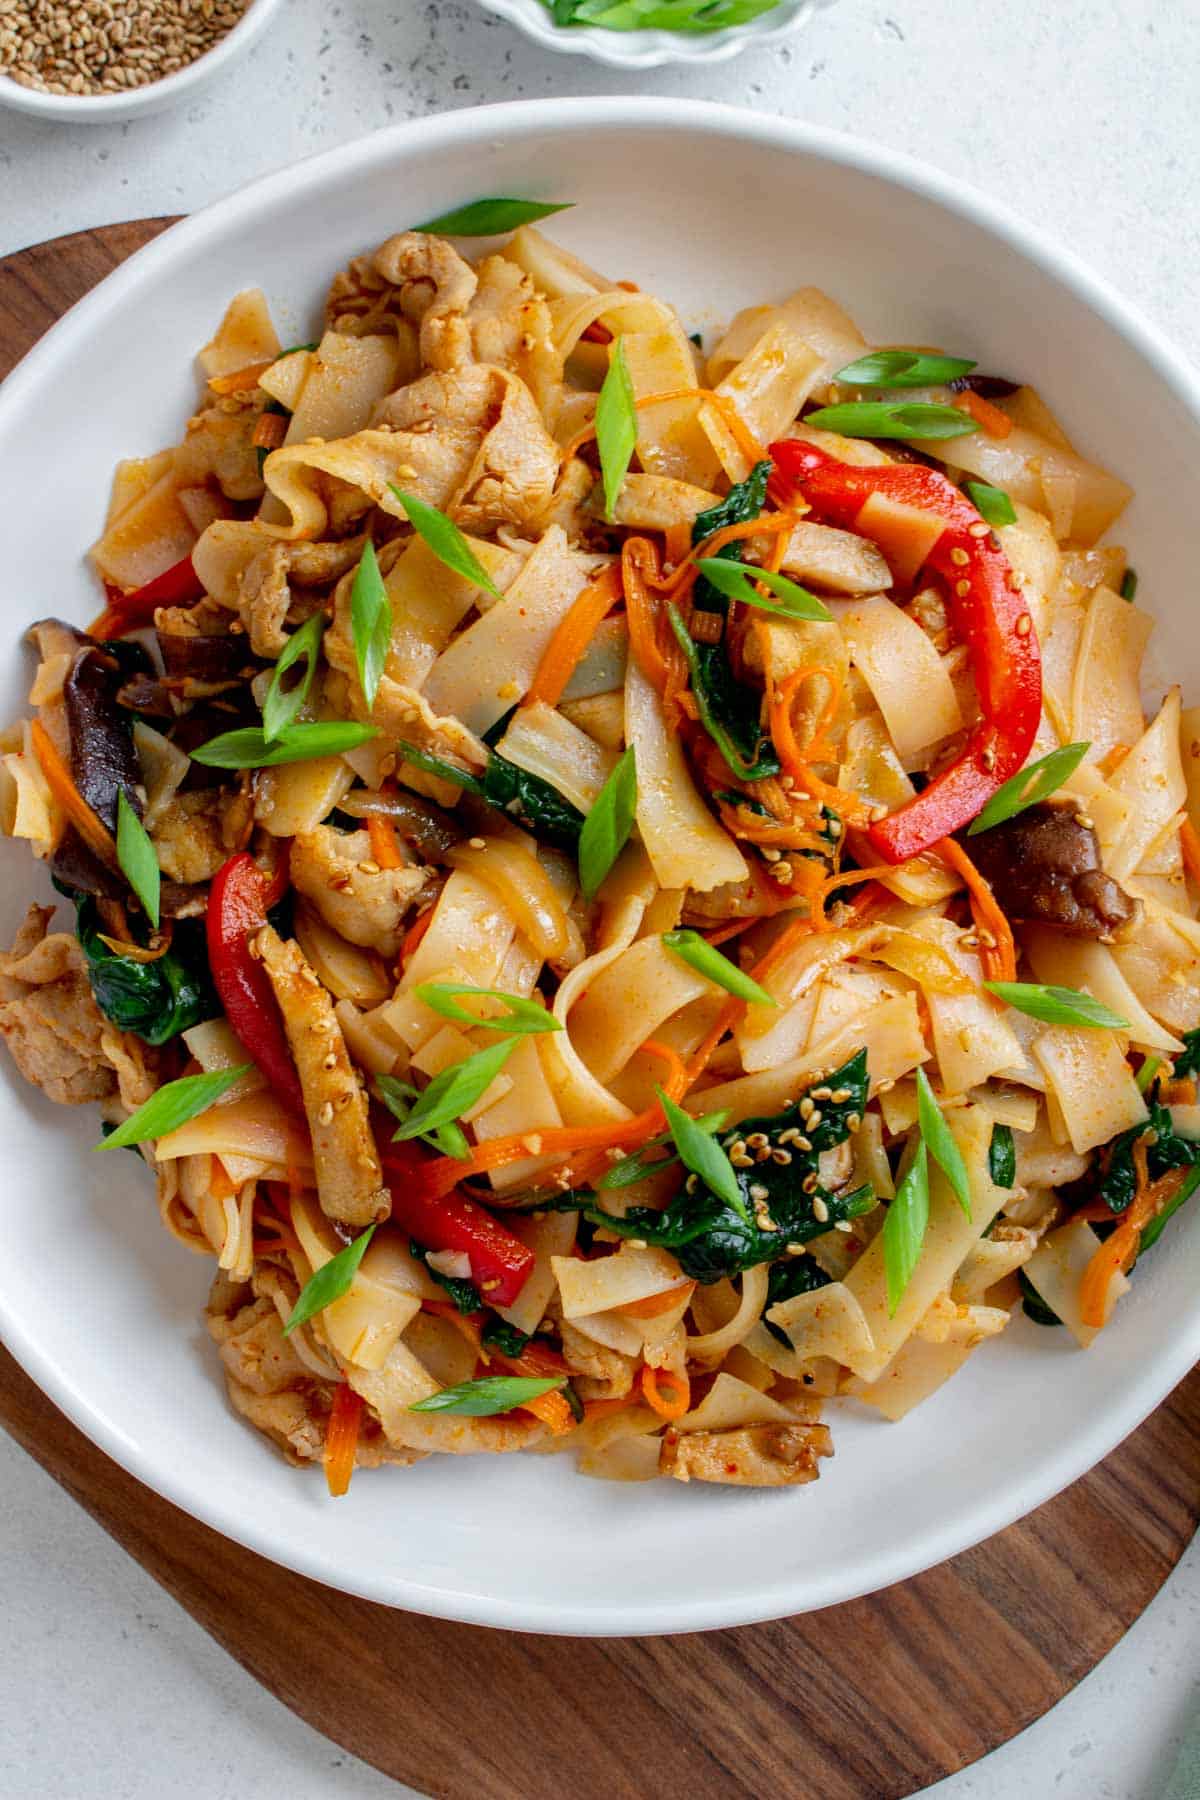 Overhead view of a plate with spicy pork noodles with spinach, carrots, bell pepper, and mushrooms.